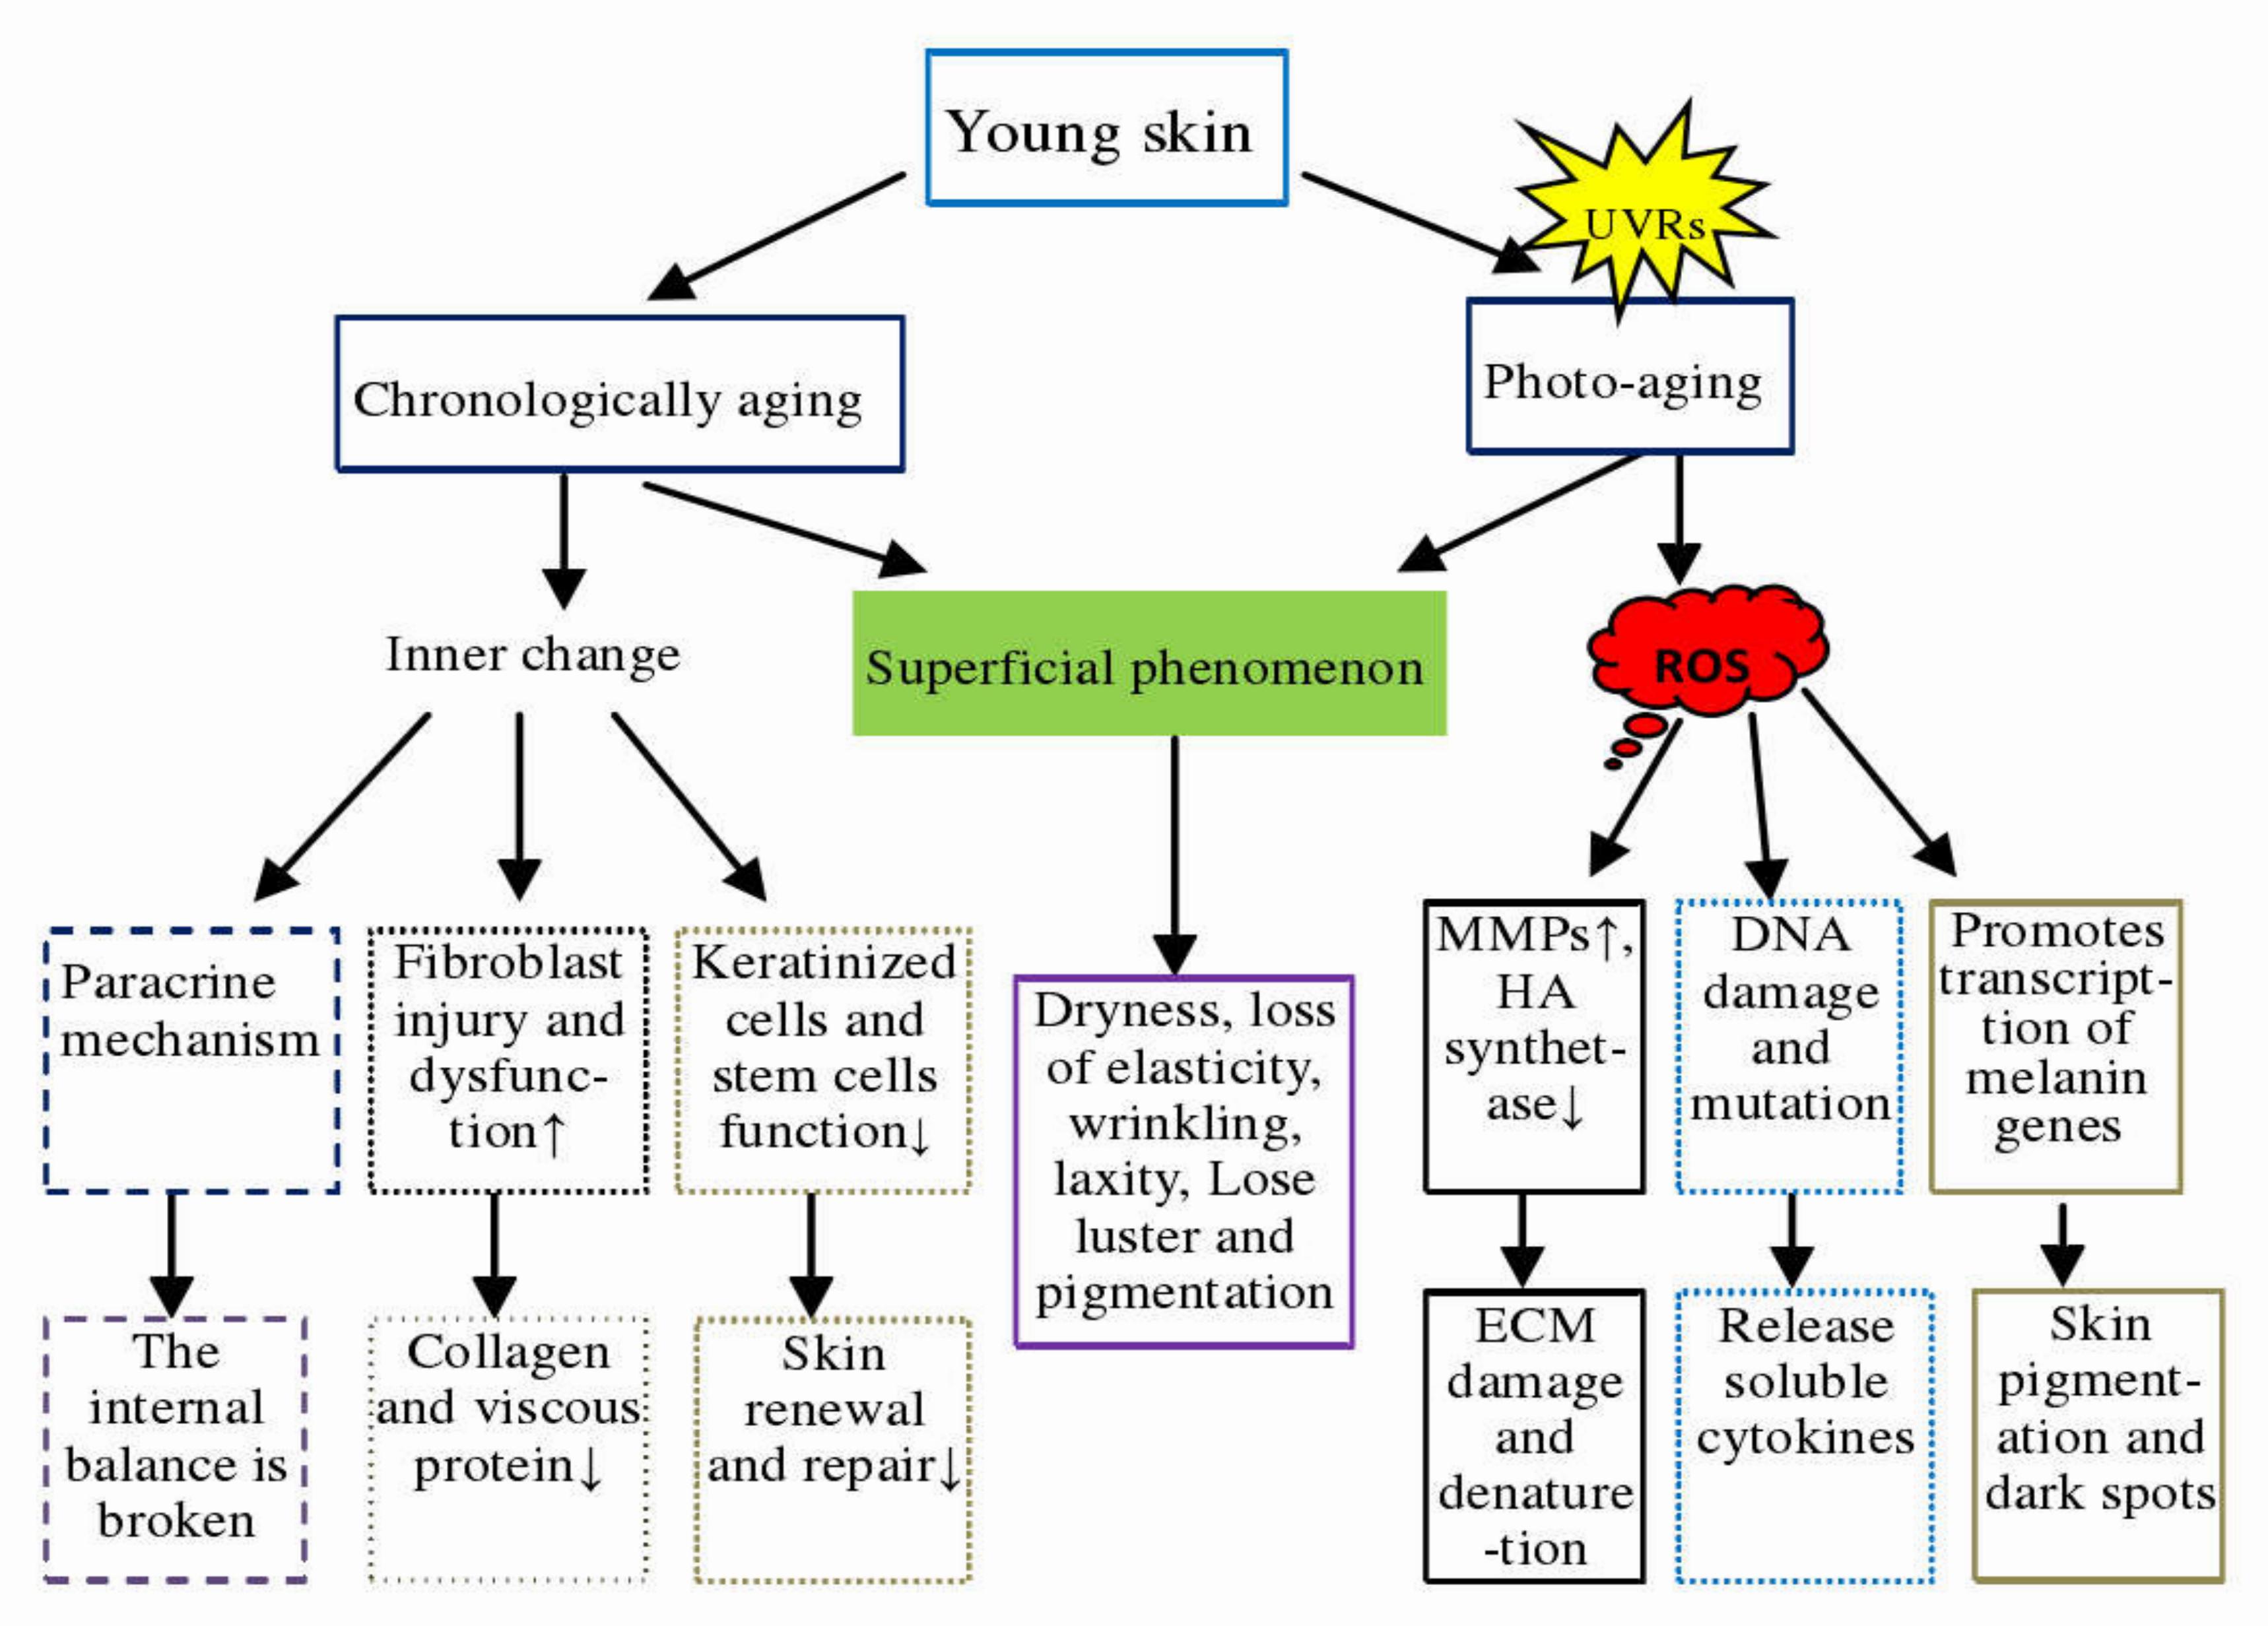 A representation of the skin aging process, showing the two types of aging (chronological and photoaging), their causes and consequences.